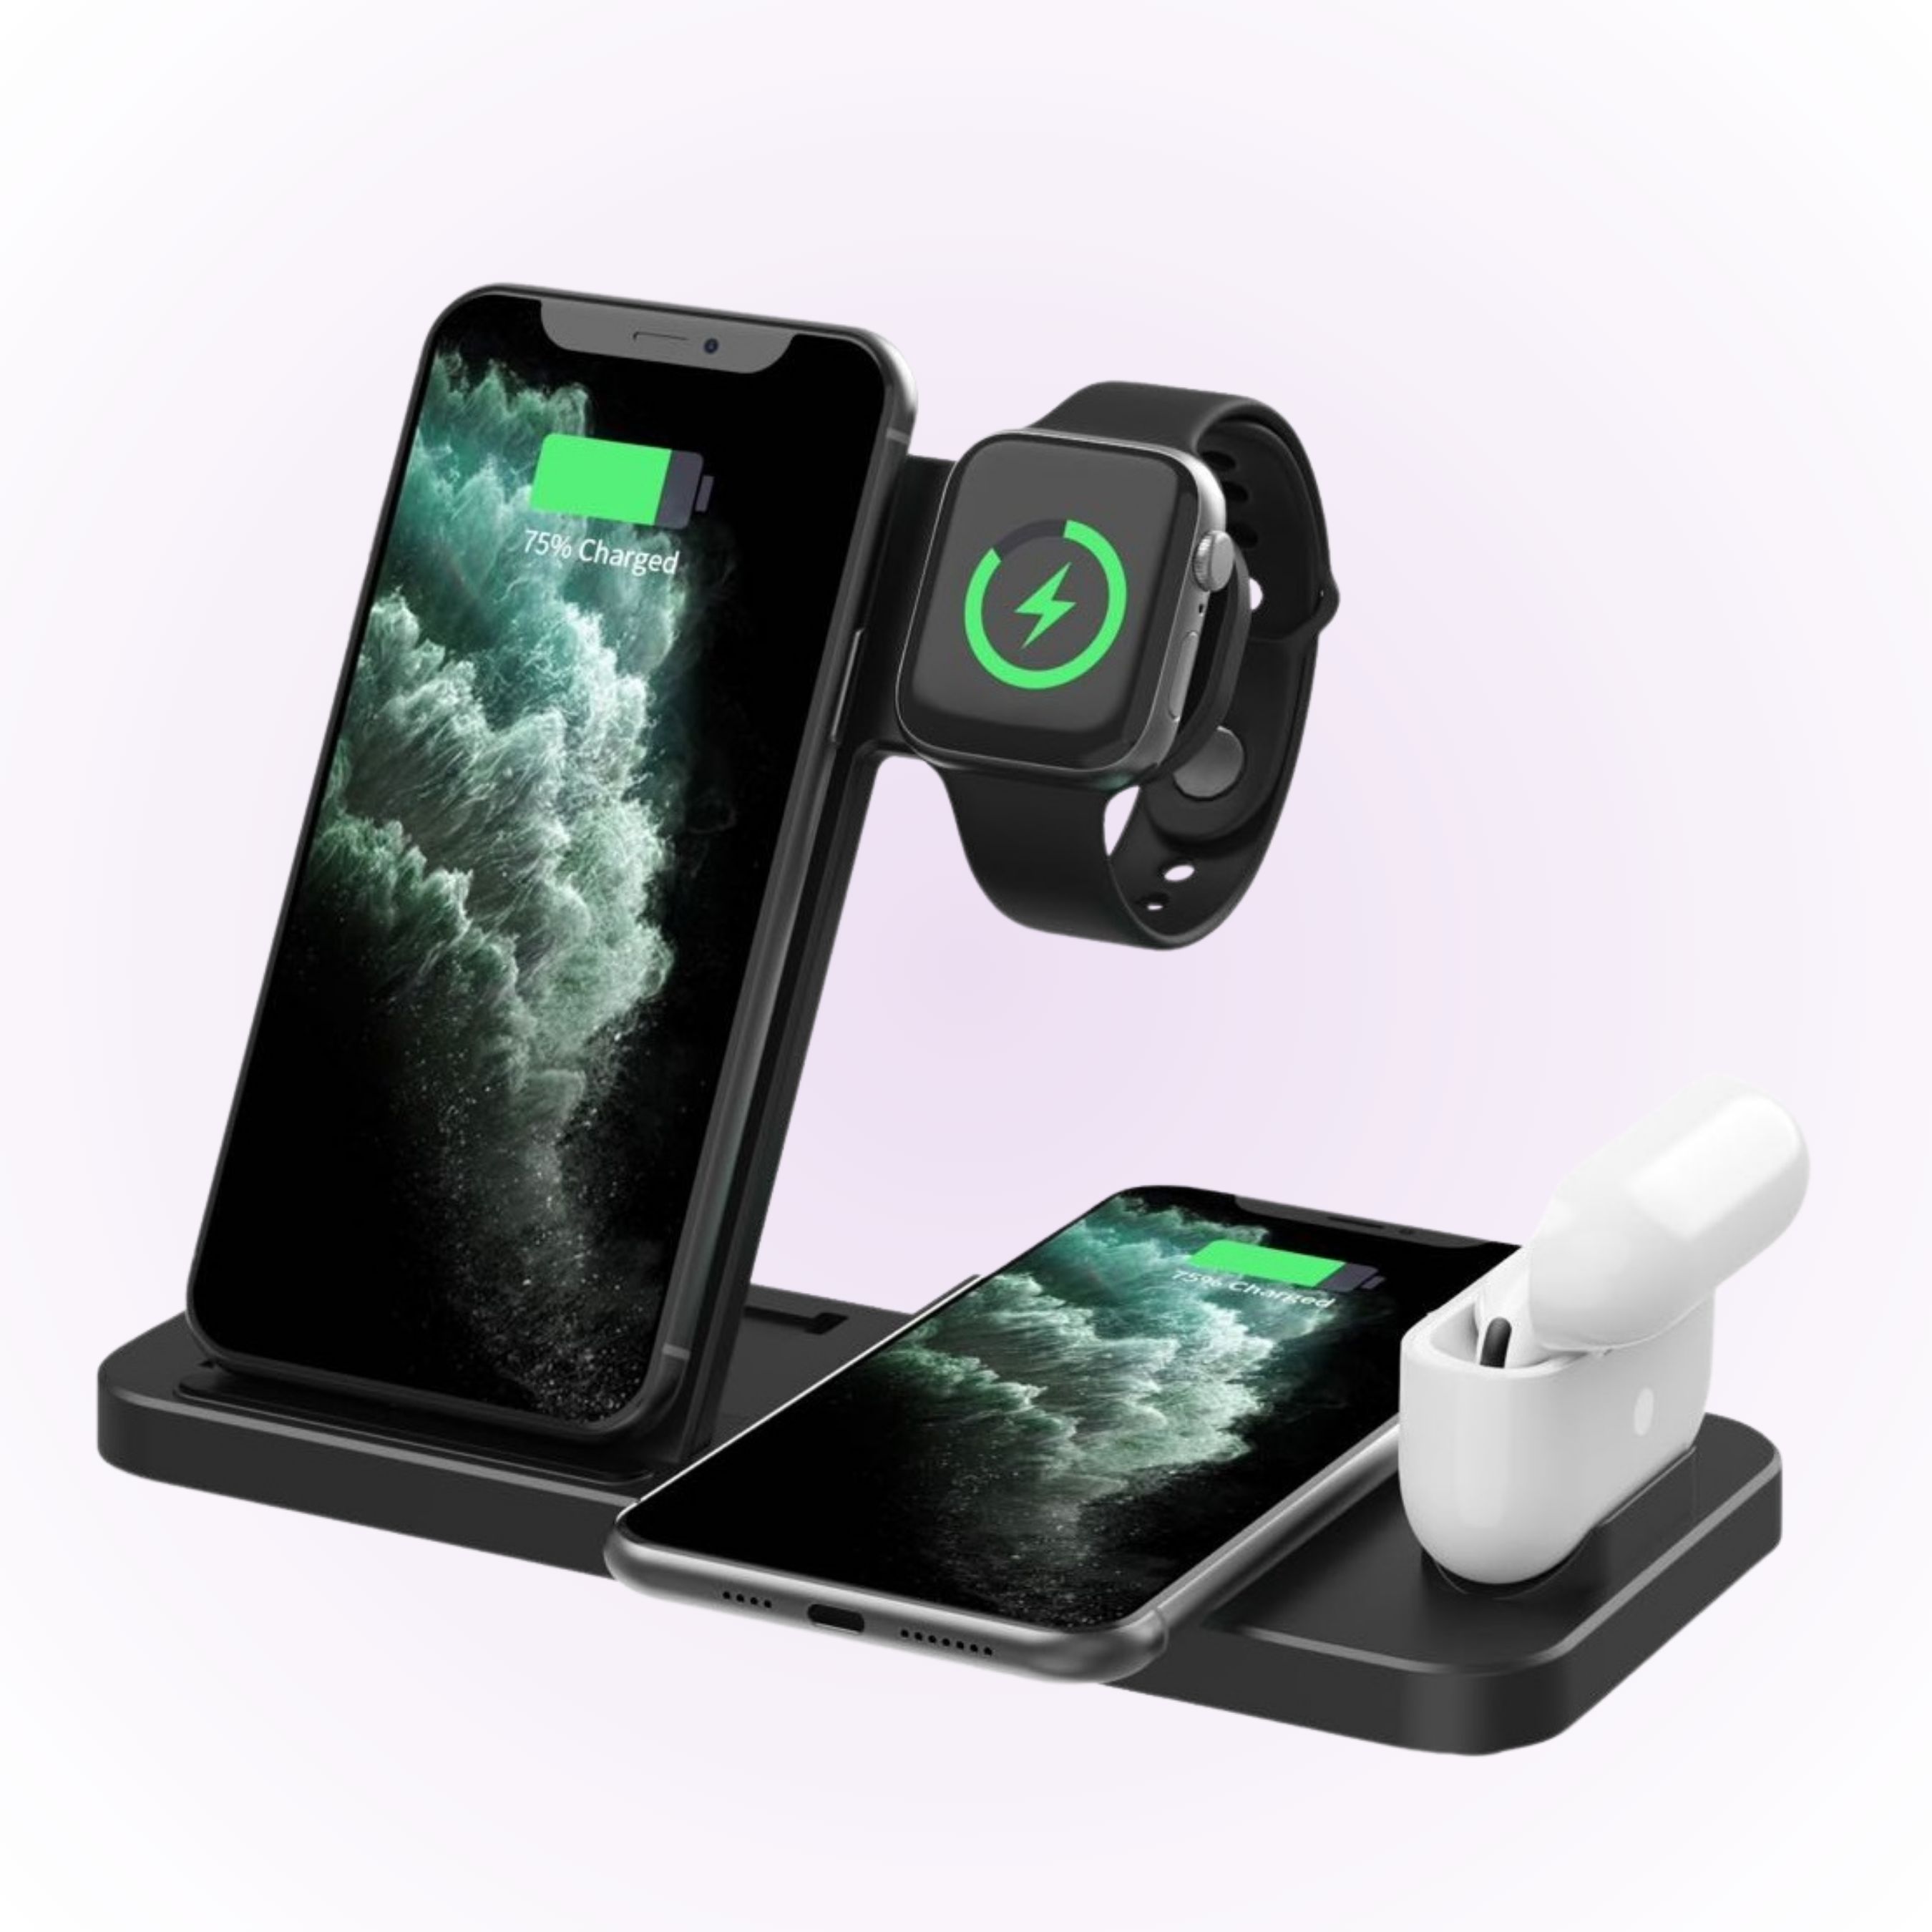 2 iphones, apple watch and airpod case on a black wireless charger